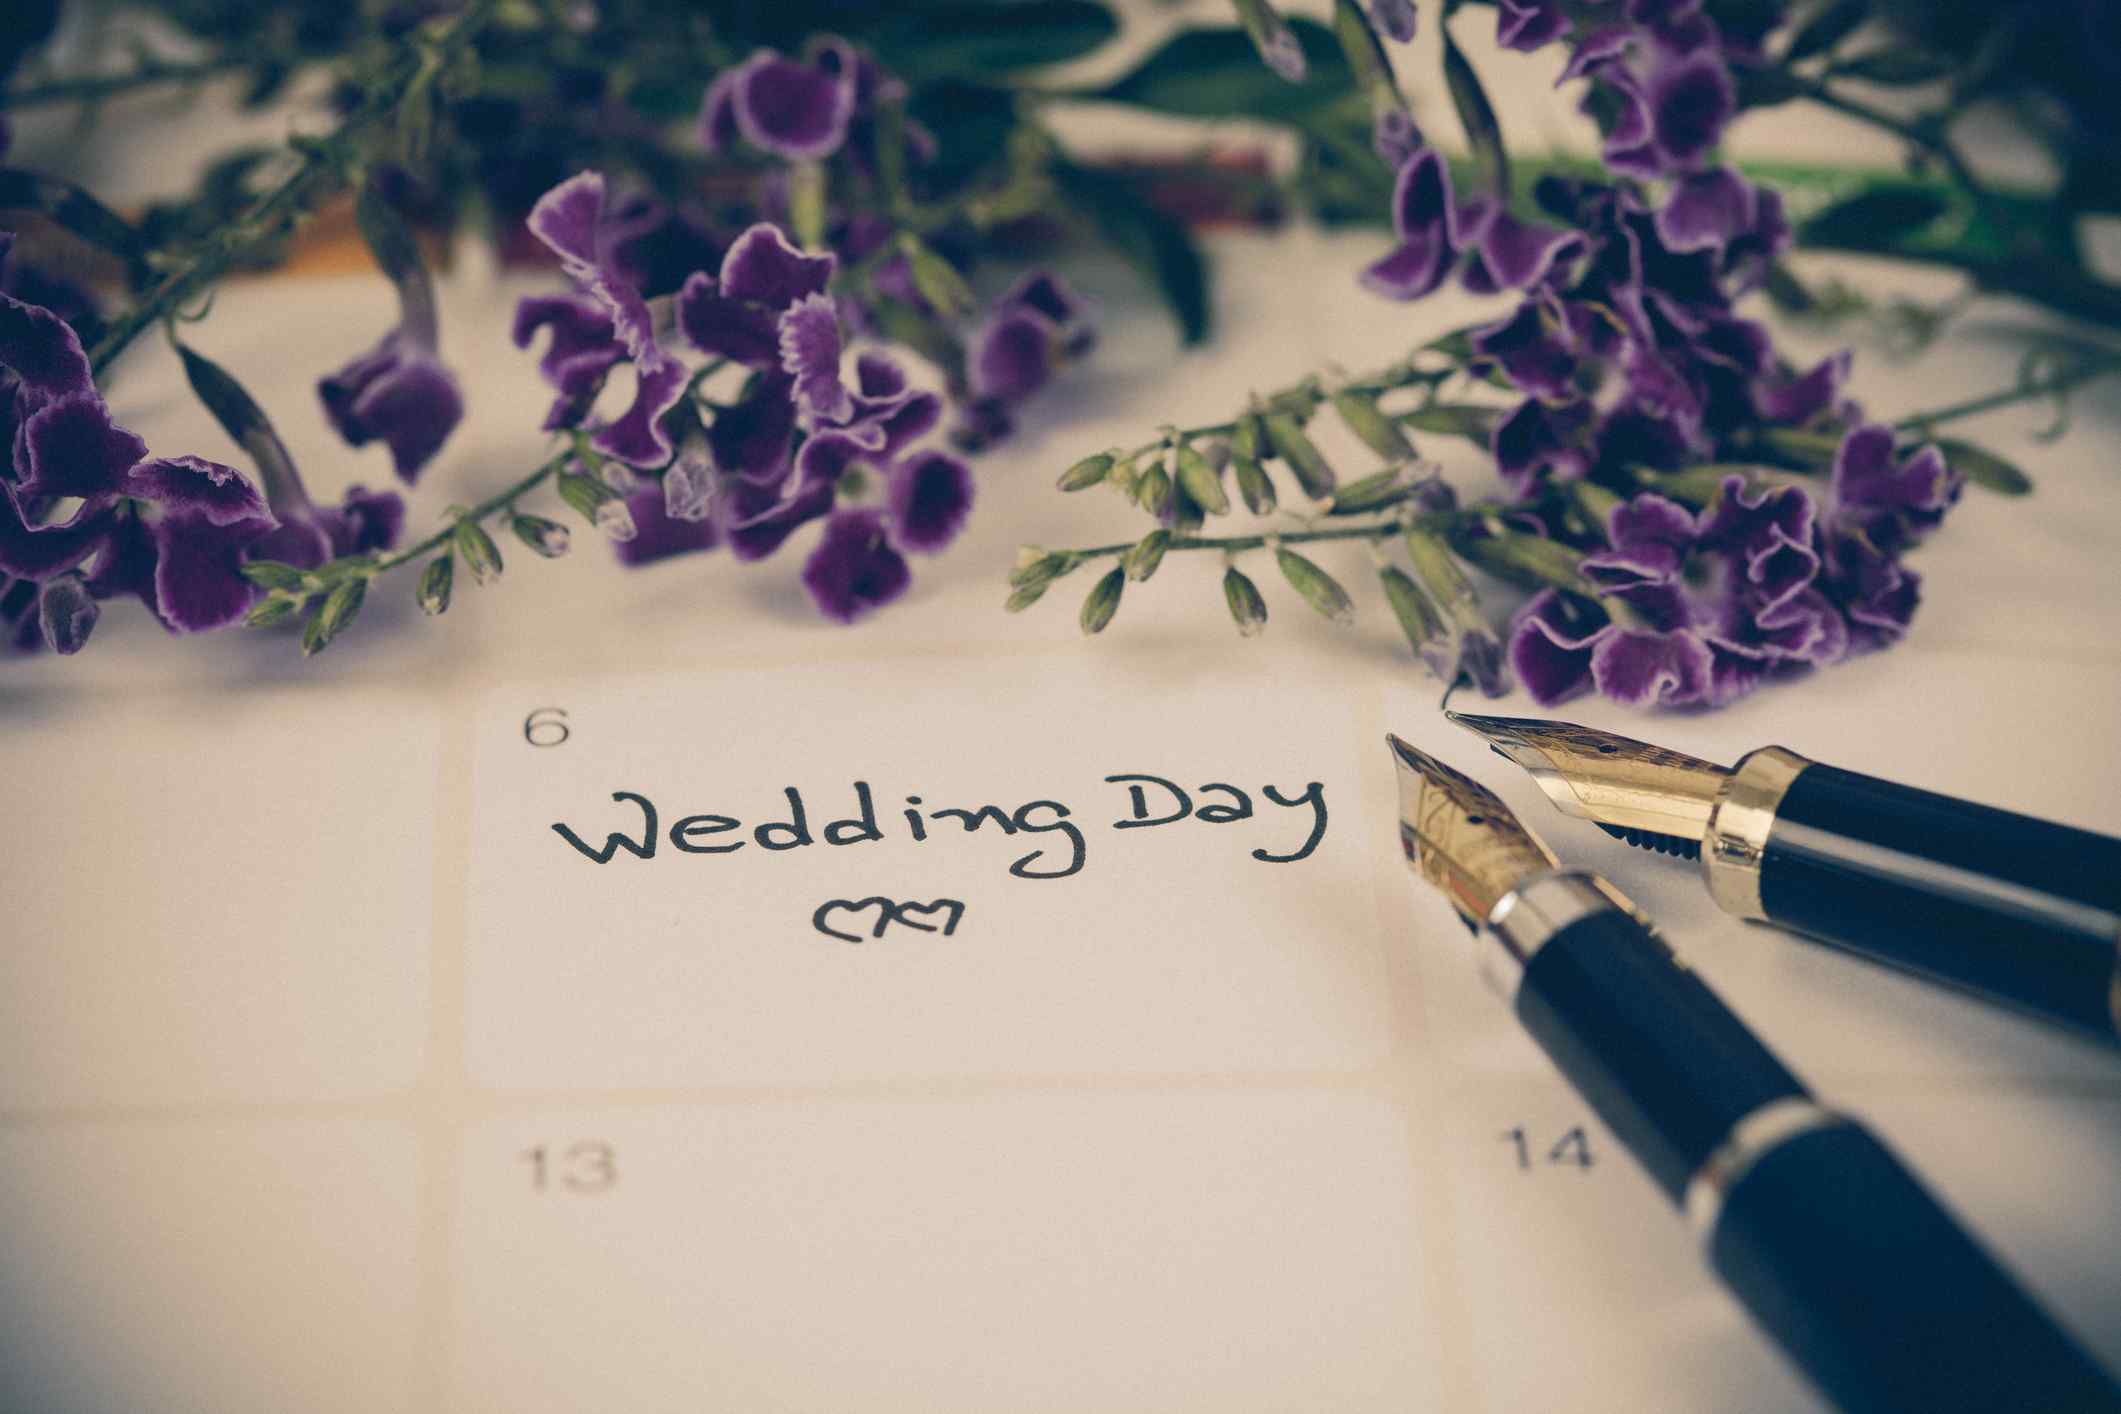 A calendar with a date labeled Wedding Day, with two fountain pens and small purple flowers around the date.